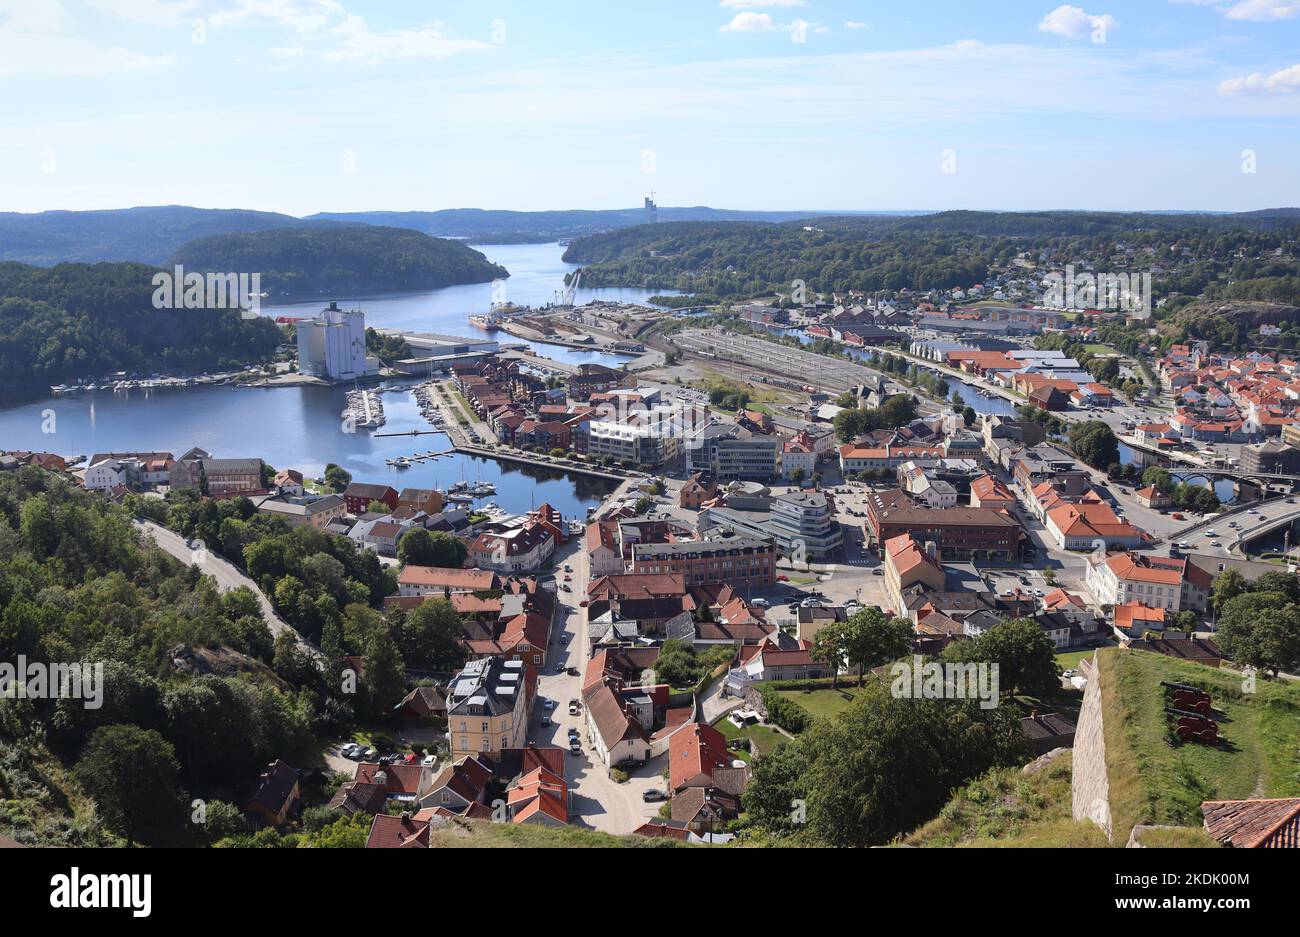 Aerial view of the Norwegian City of Halden in Viken county. Located at the mouth of the Tista river, Halden is a border town on the Iddefjord. Stock Photo